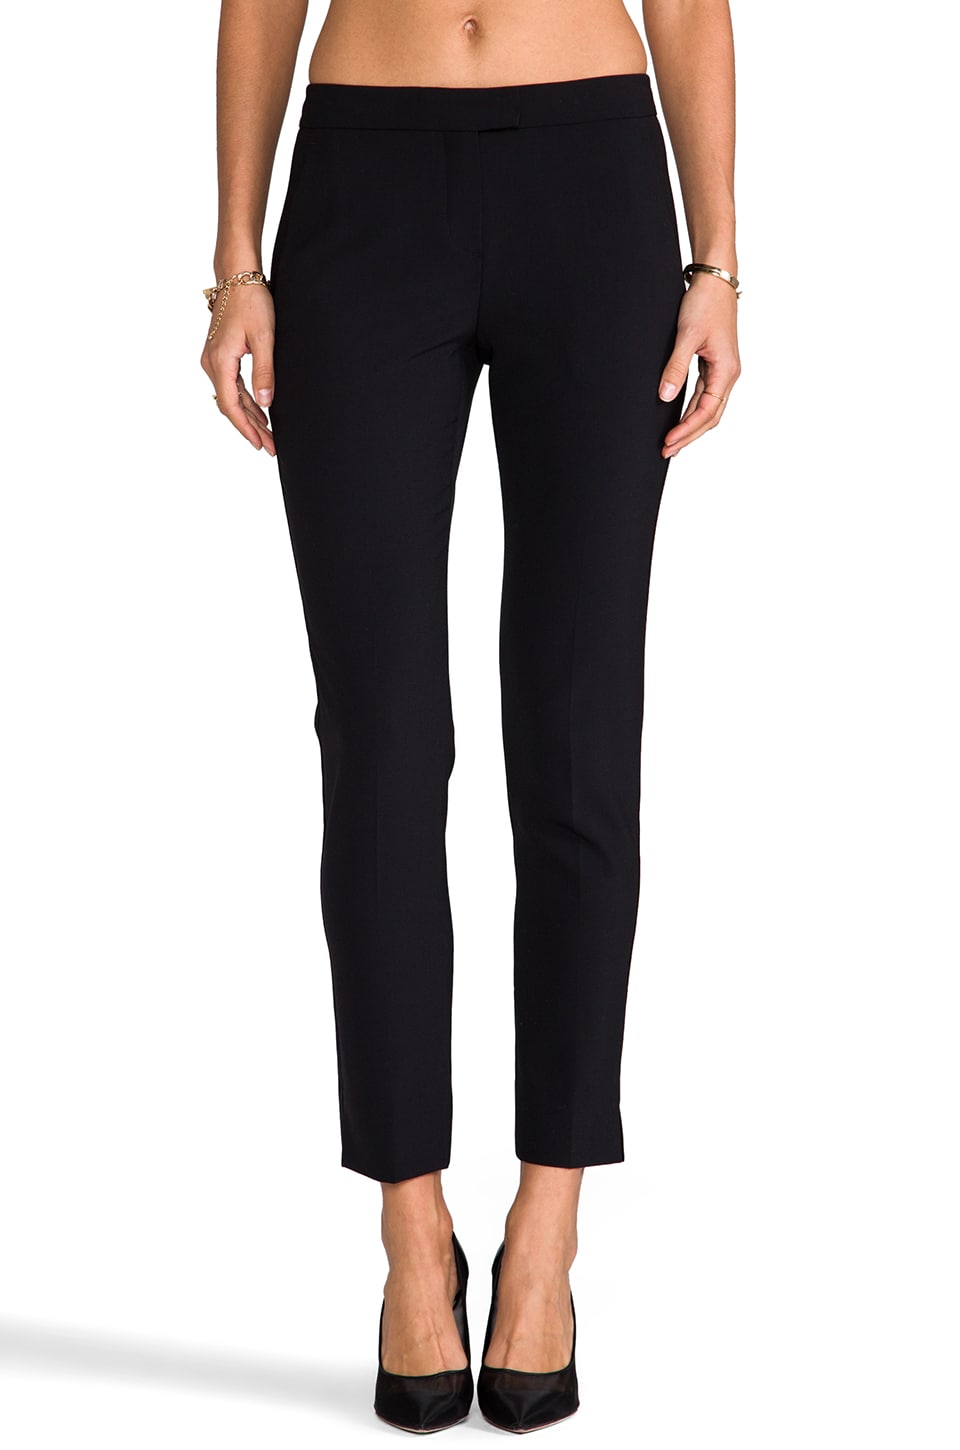 Theory Ibbey 2 Skinny Trouser in Black | REVOLVE